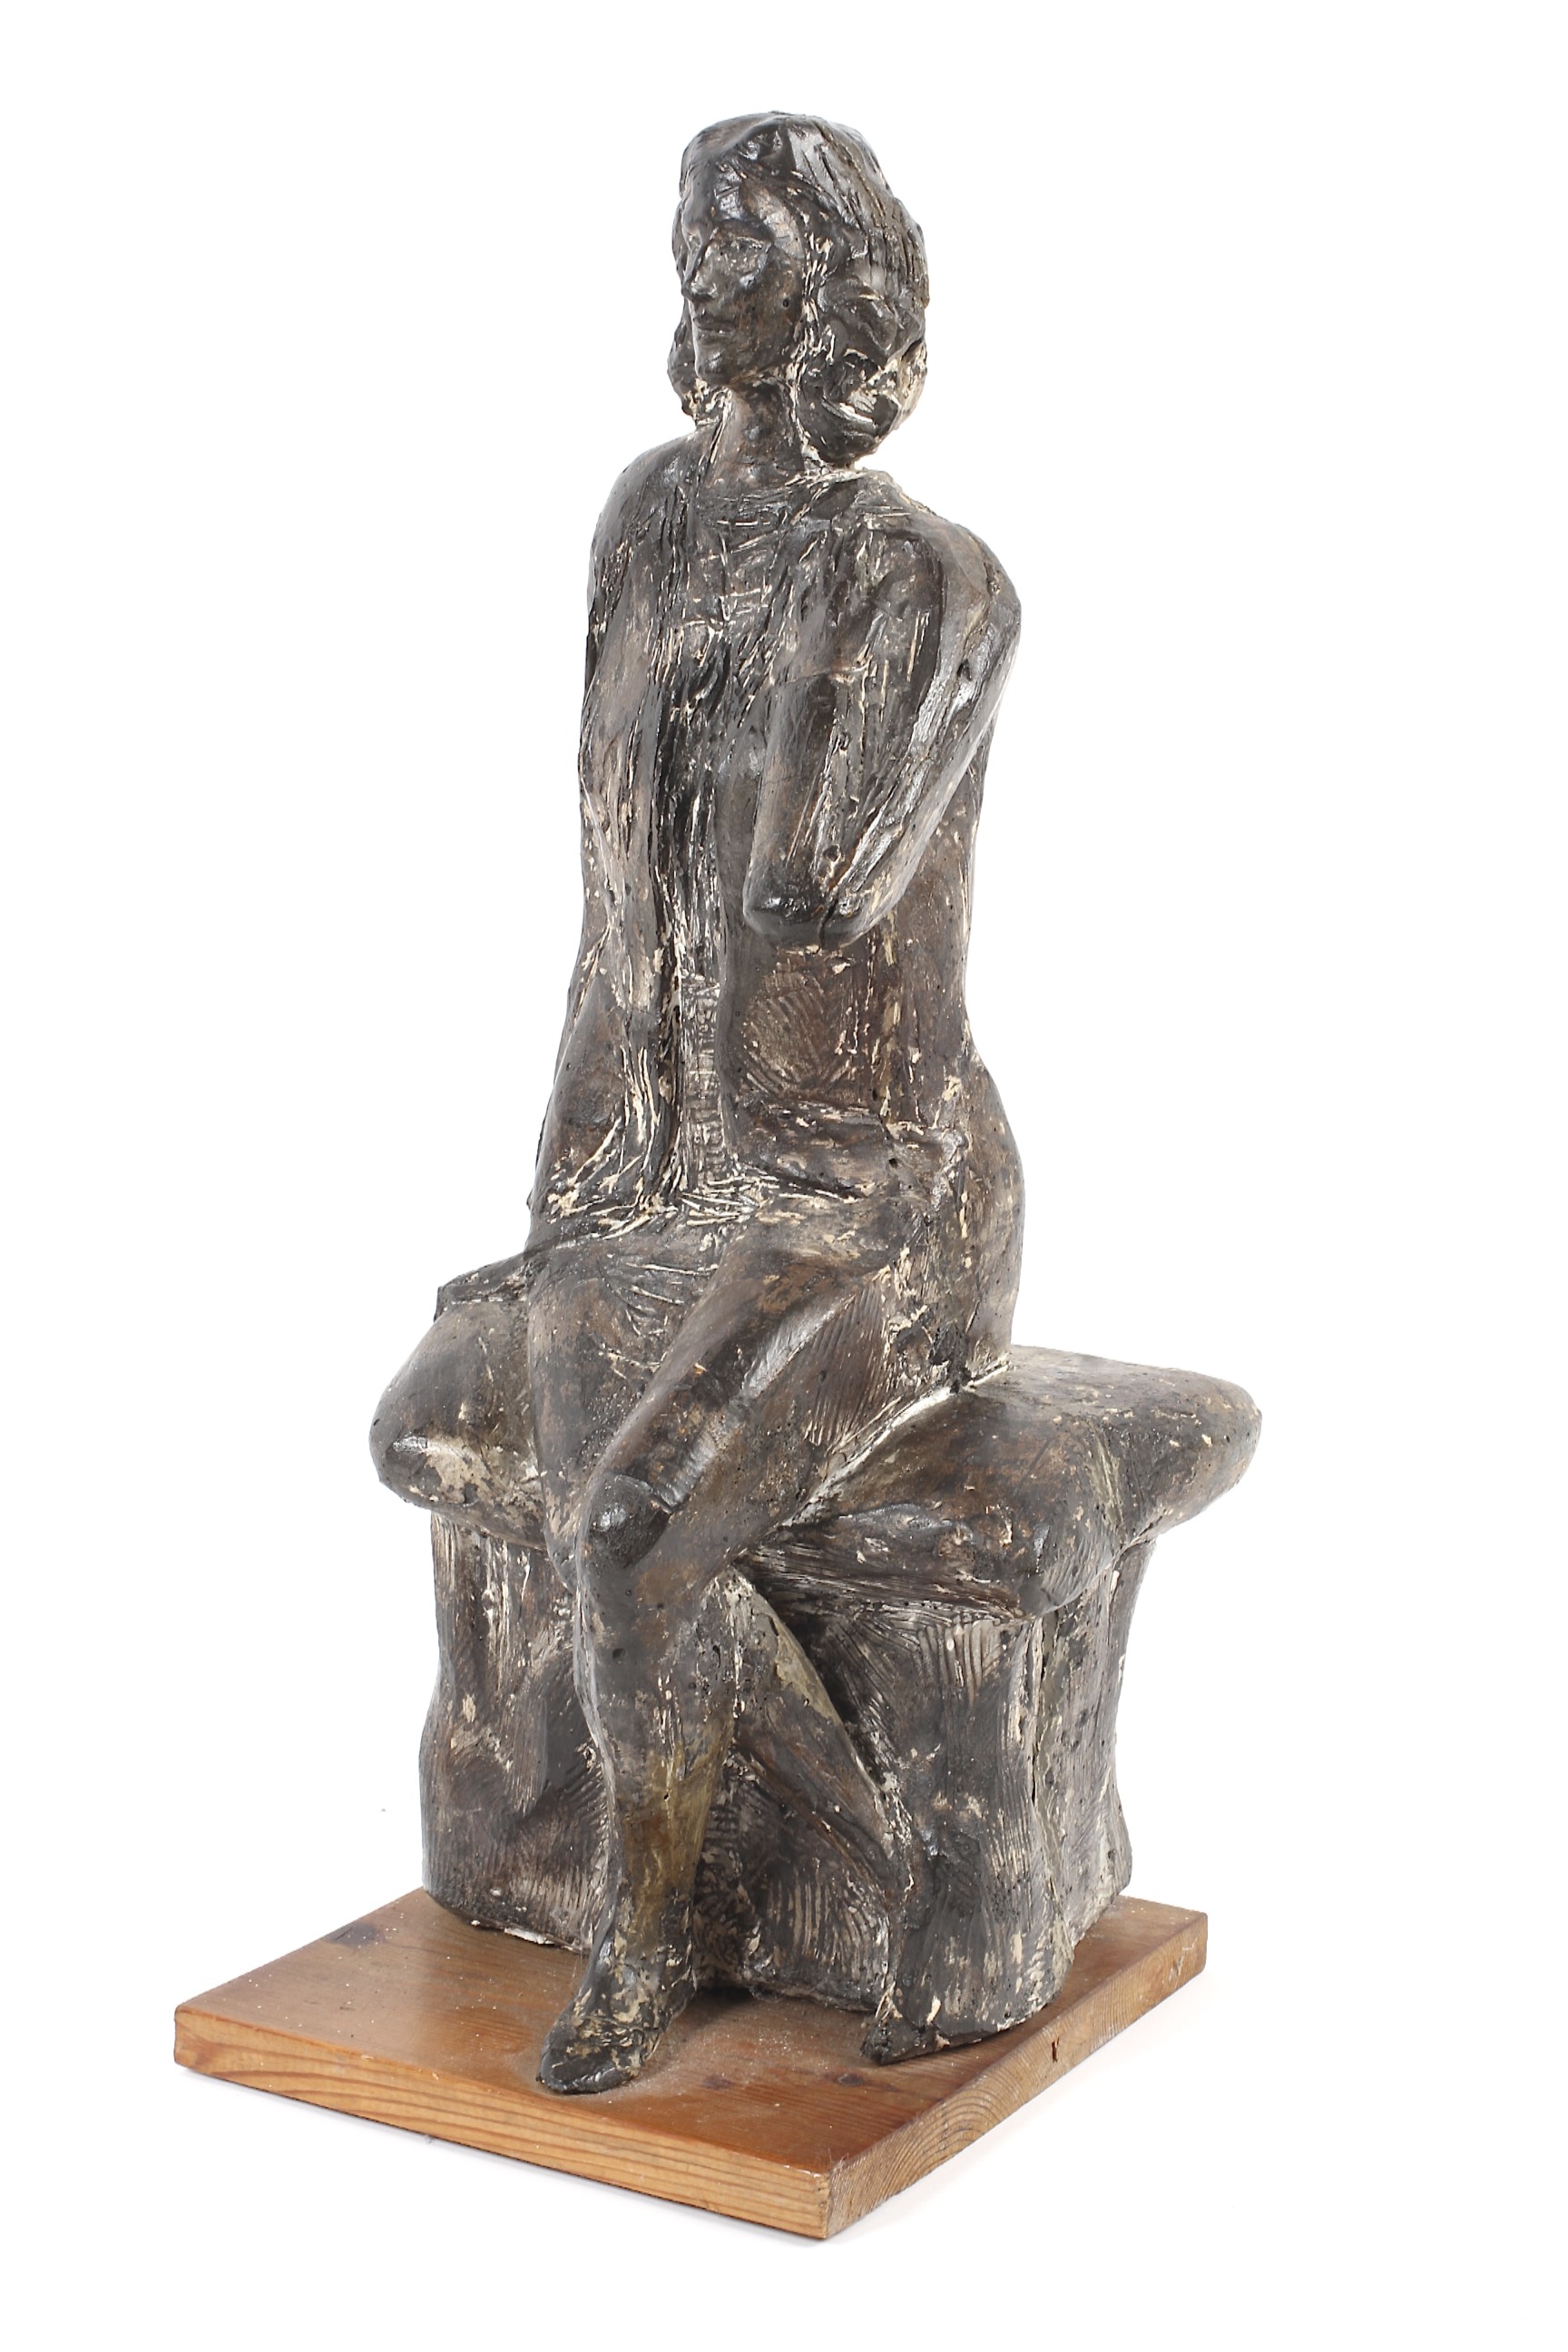 A 20th century sculpture of a seated lady.